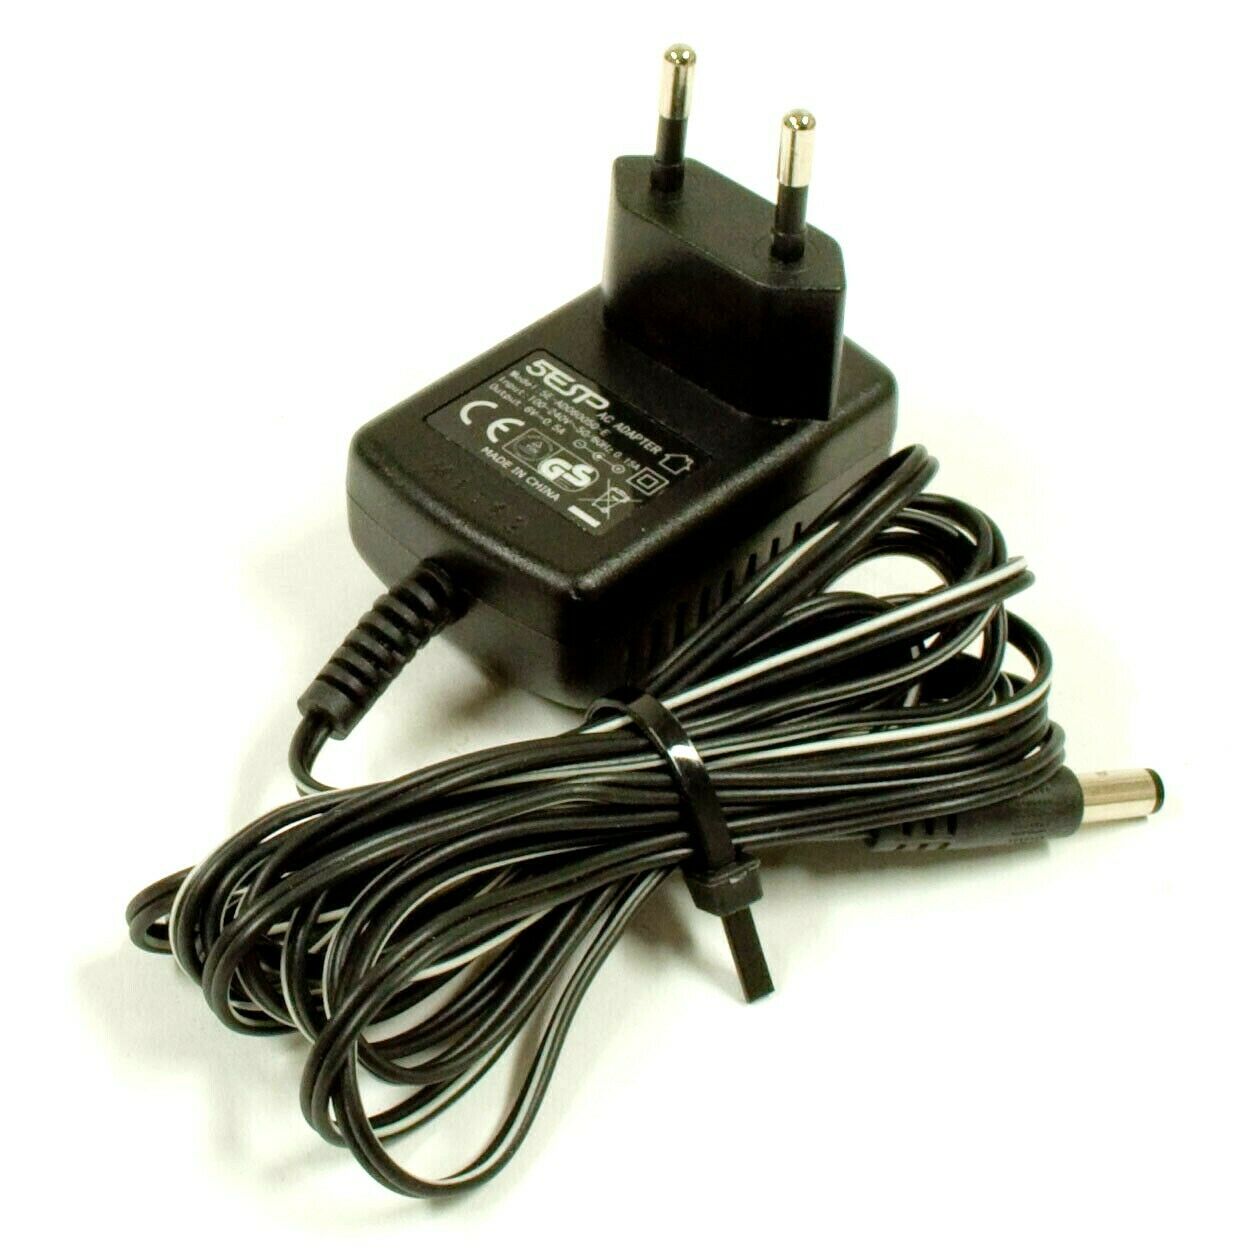 Genexis HK-S-050A050-EU AC Adapter 5V 0.5A I.T.E. Power Supply Europlug Genexis HK-S-050A050-EU AC Adapter 5V 0.5A I.T. - Click Image to Close